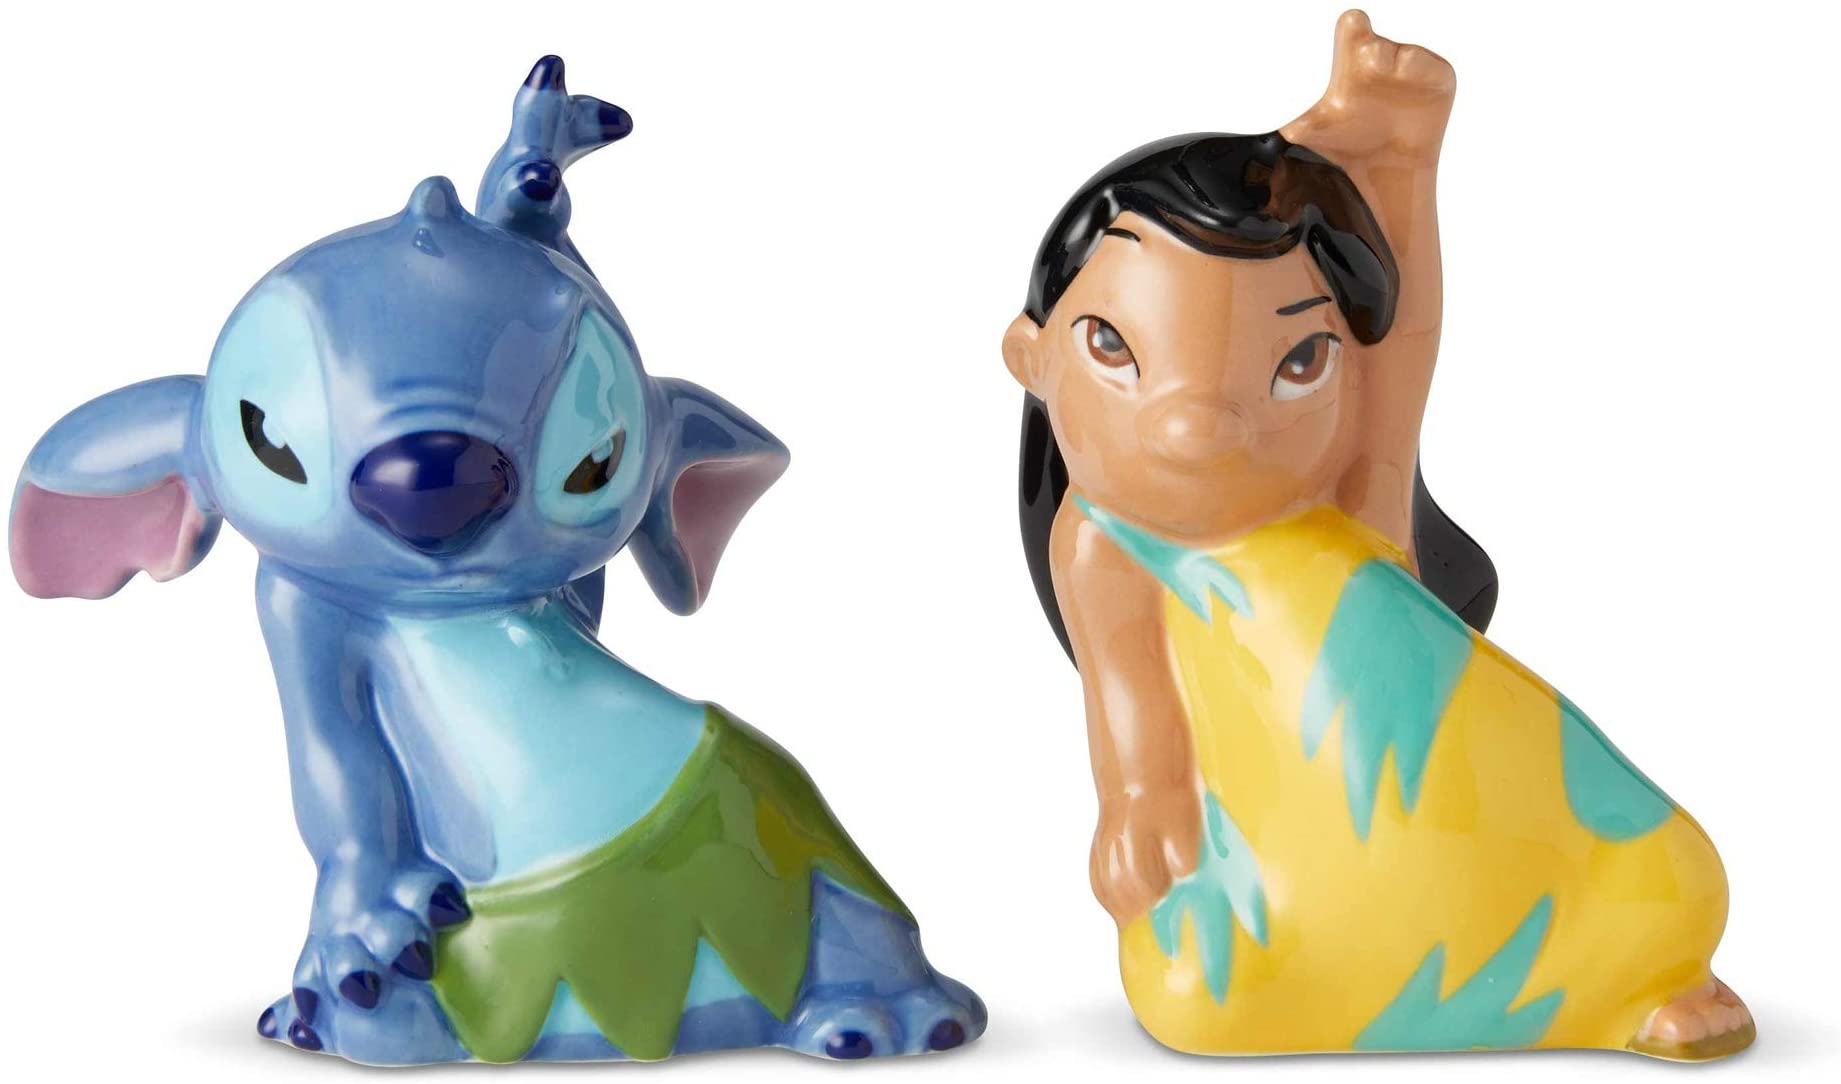 Lilo and Stitch Salt and Pepper Shakers